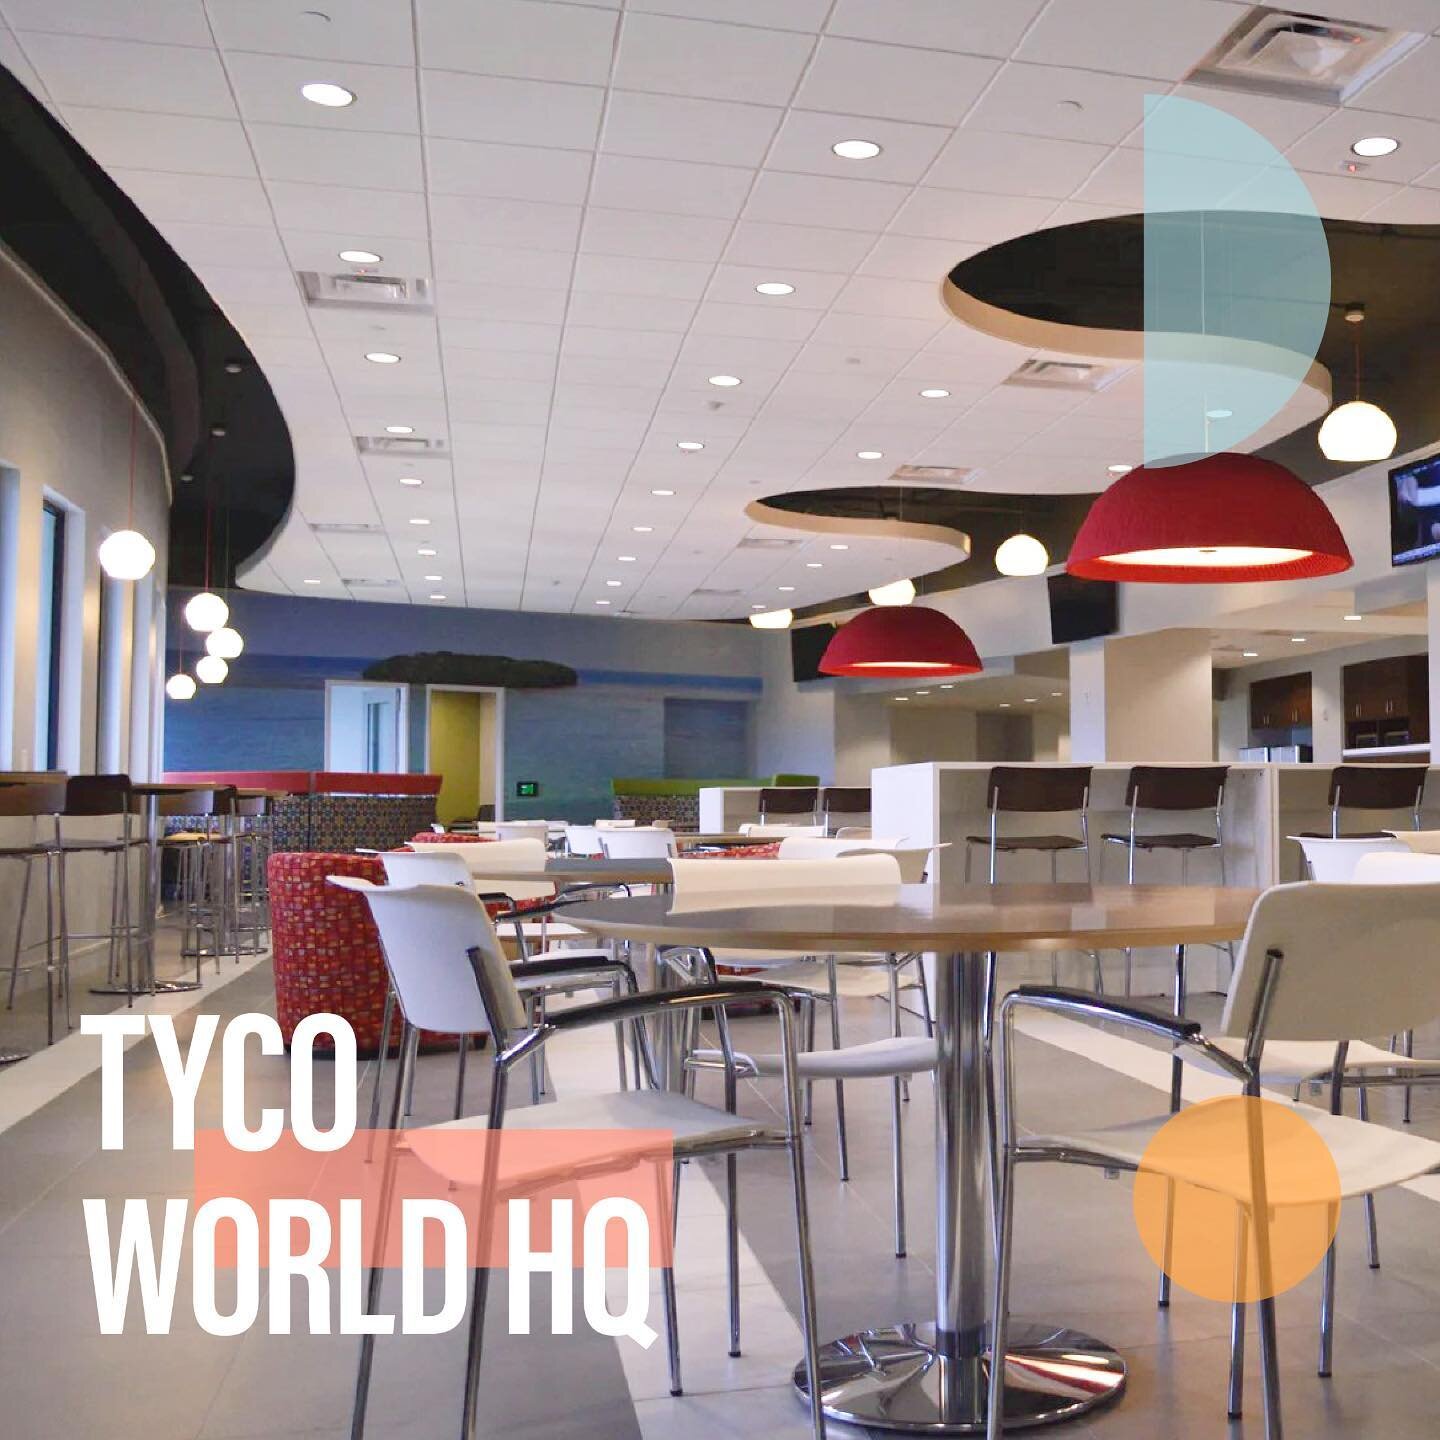 We had the pleasure of helping TYCO establish their new 30,000sf office space after being split off from another company.

Our team worked tirelessly to create a unified and streamlined office space by taking their old office standards and creating n